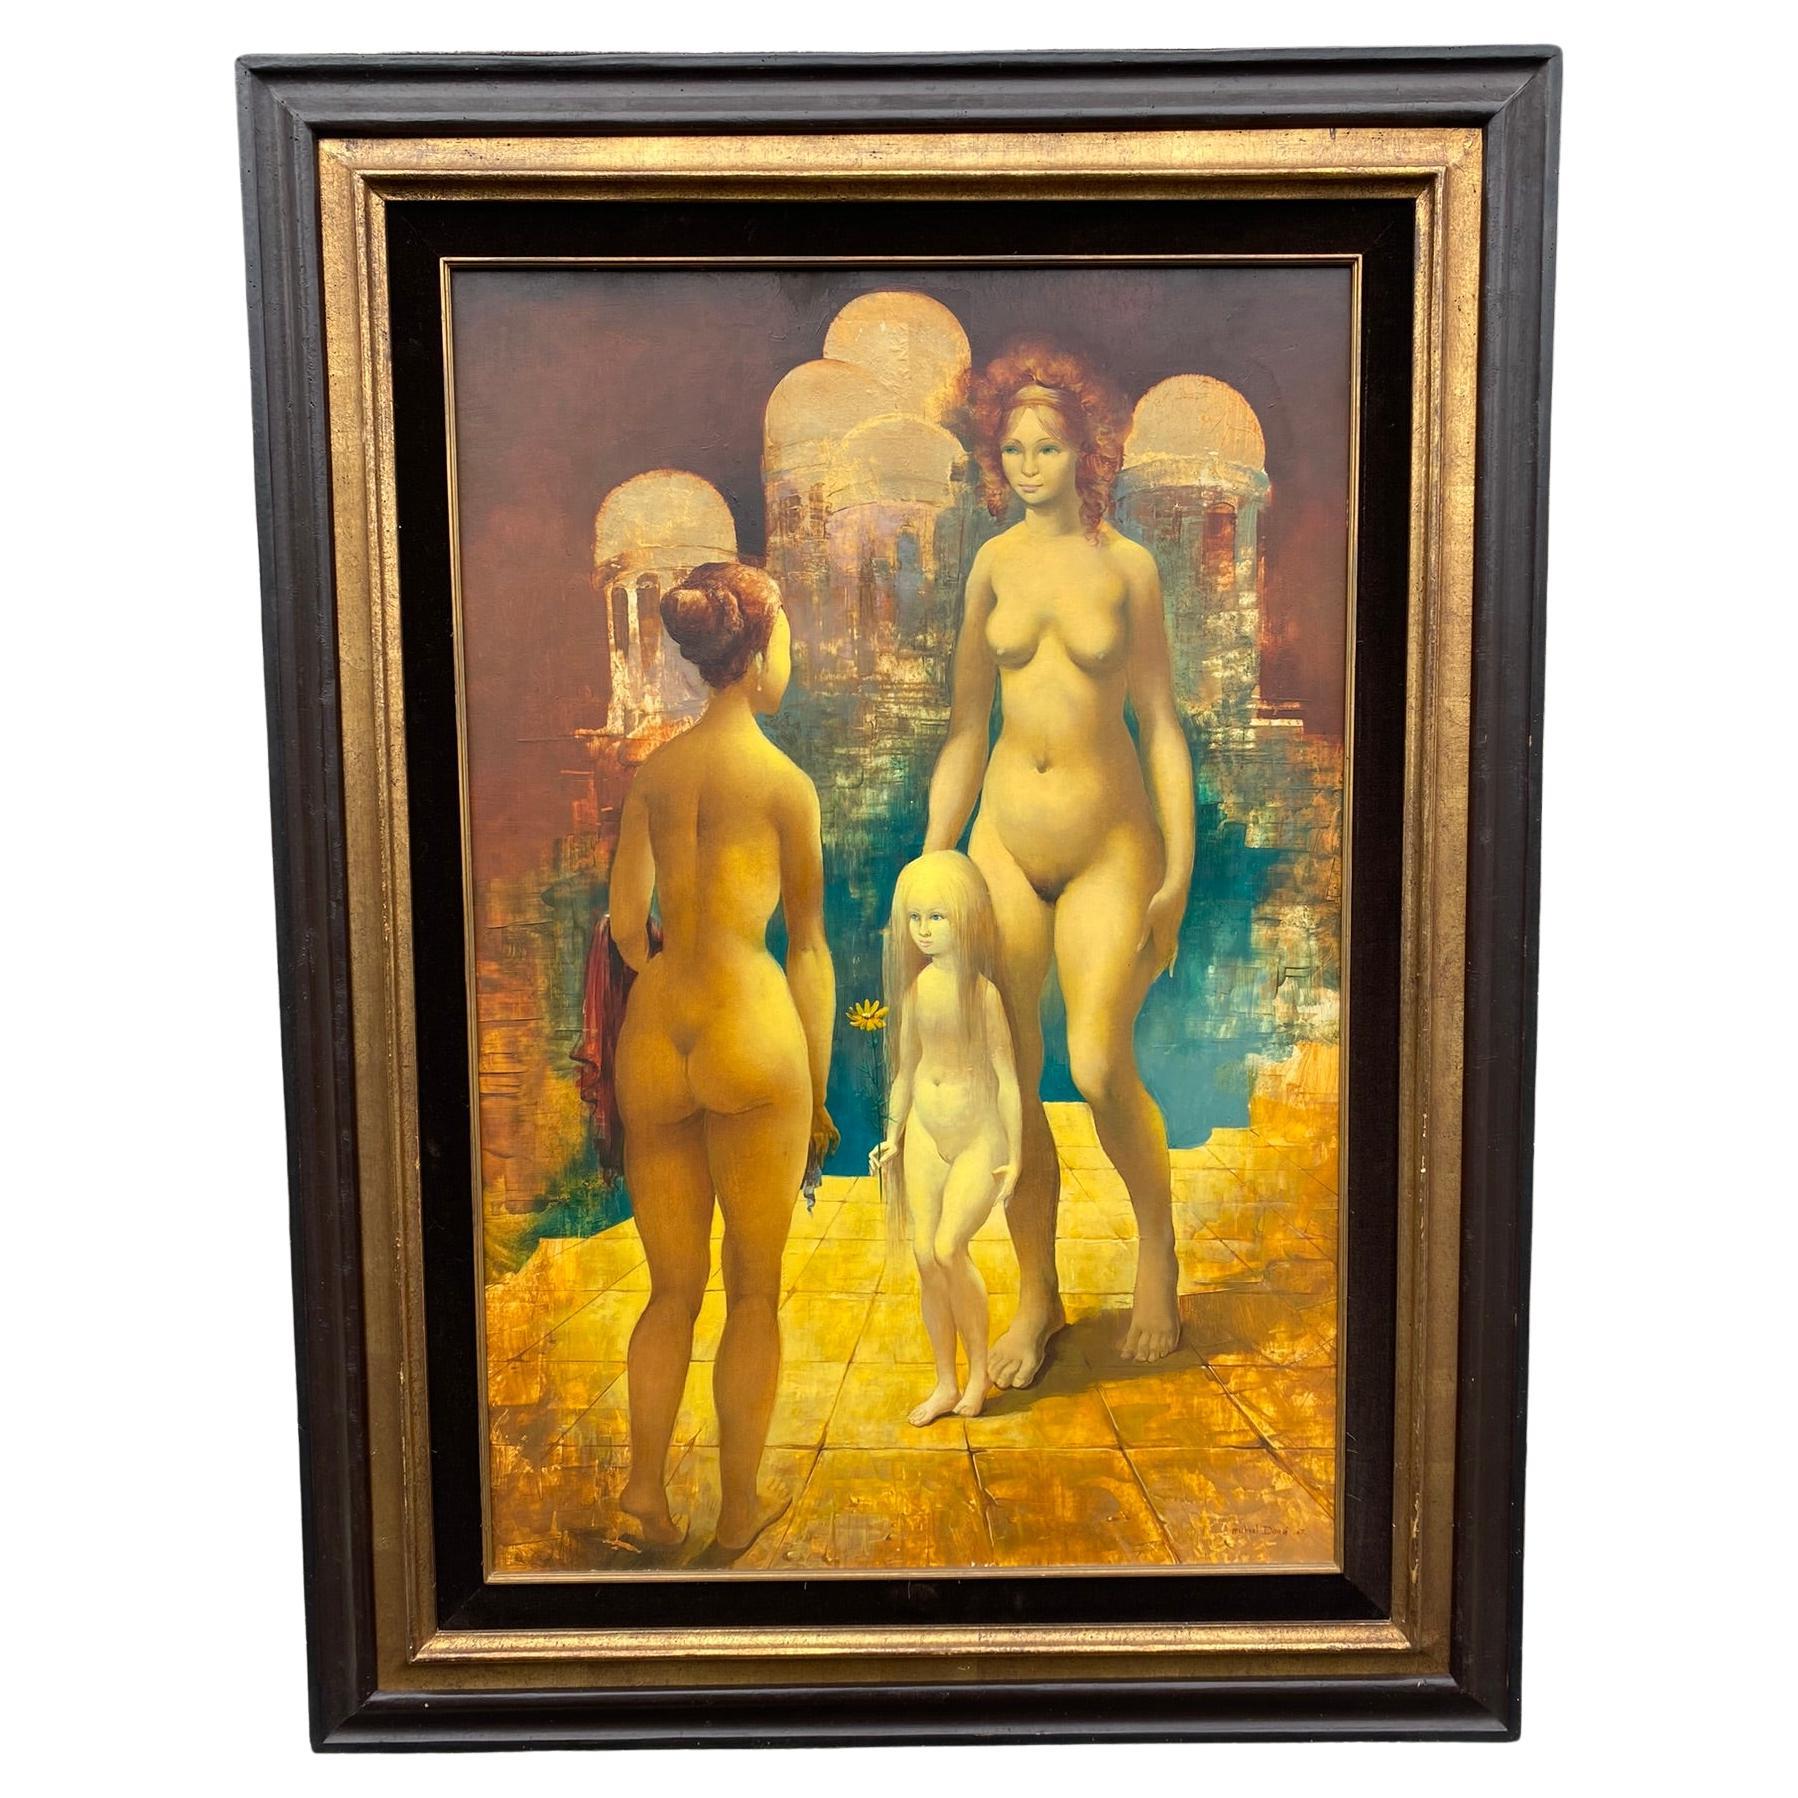 Michael Doré "the Venetian Blond" Oil on Panel Signed and Dated 1967 For Sale